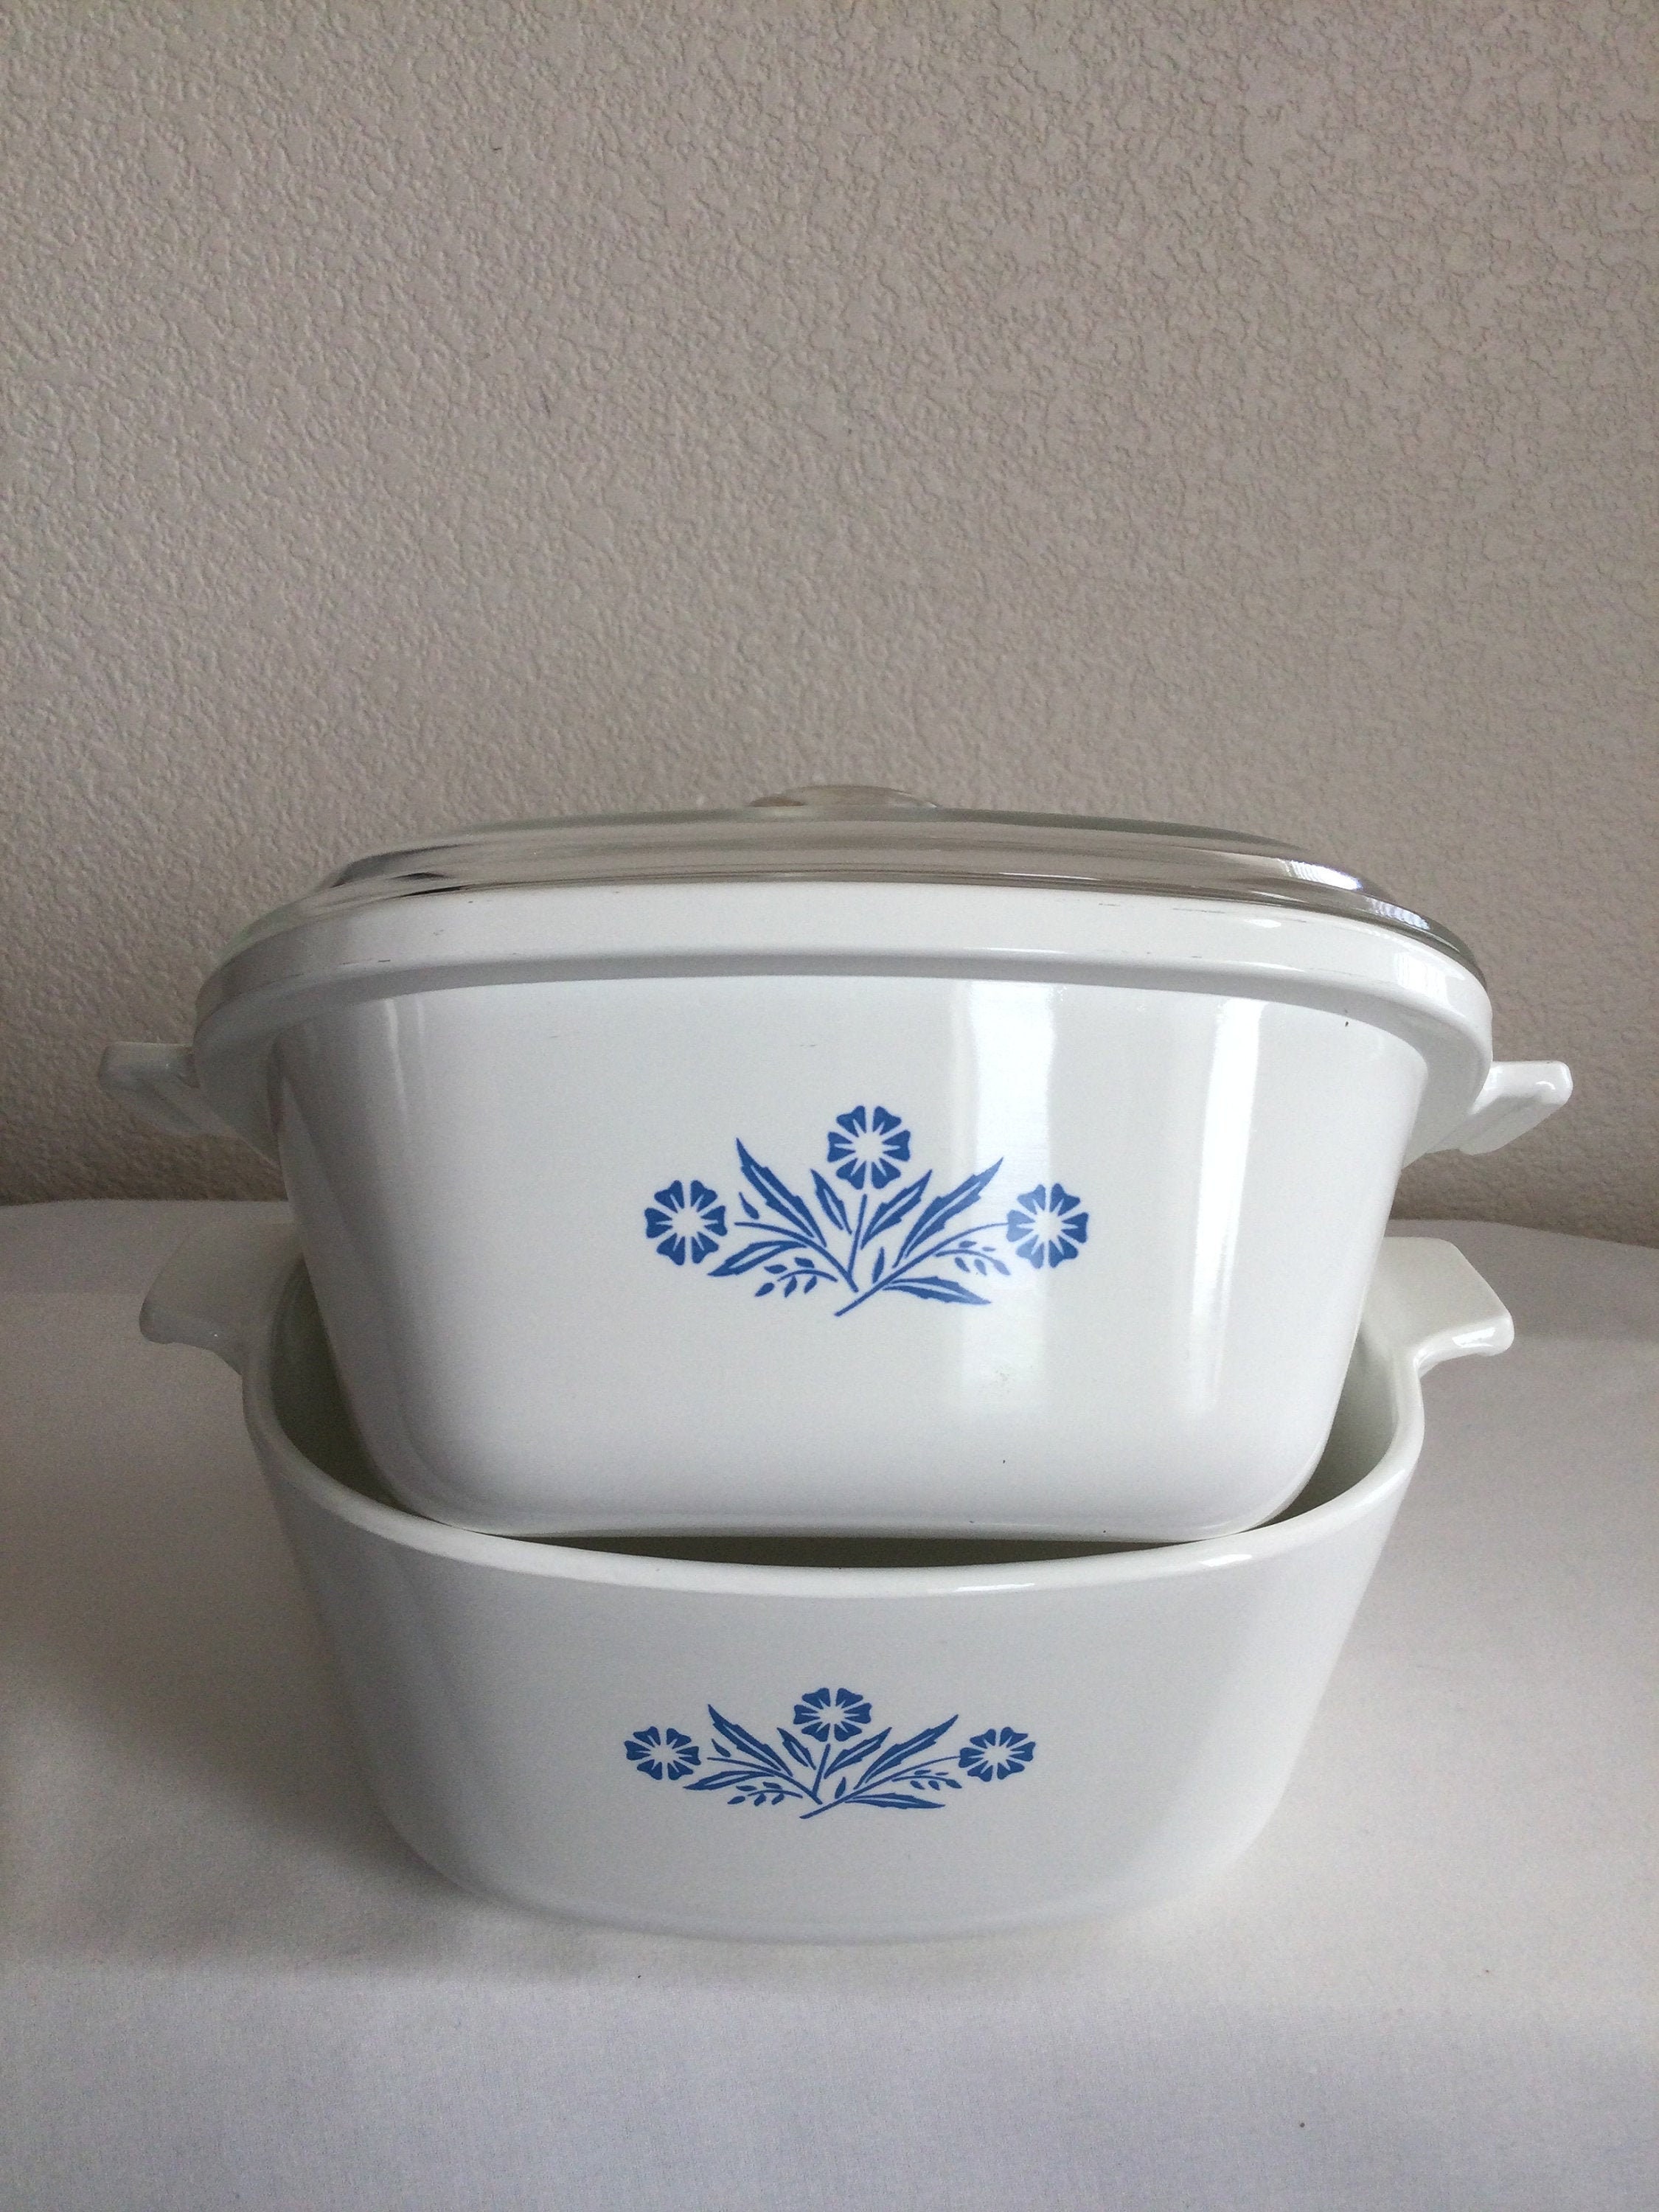 Vintage Pyrex Flameware Double Boiler Bain Marie Blue Tint Glass Handles  Stainless Steel Flame Made in USA 1.5 Quart 